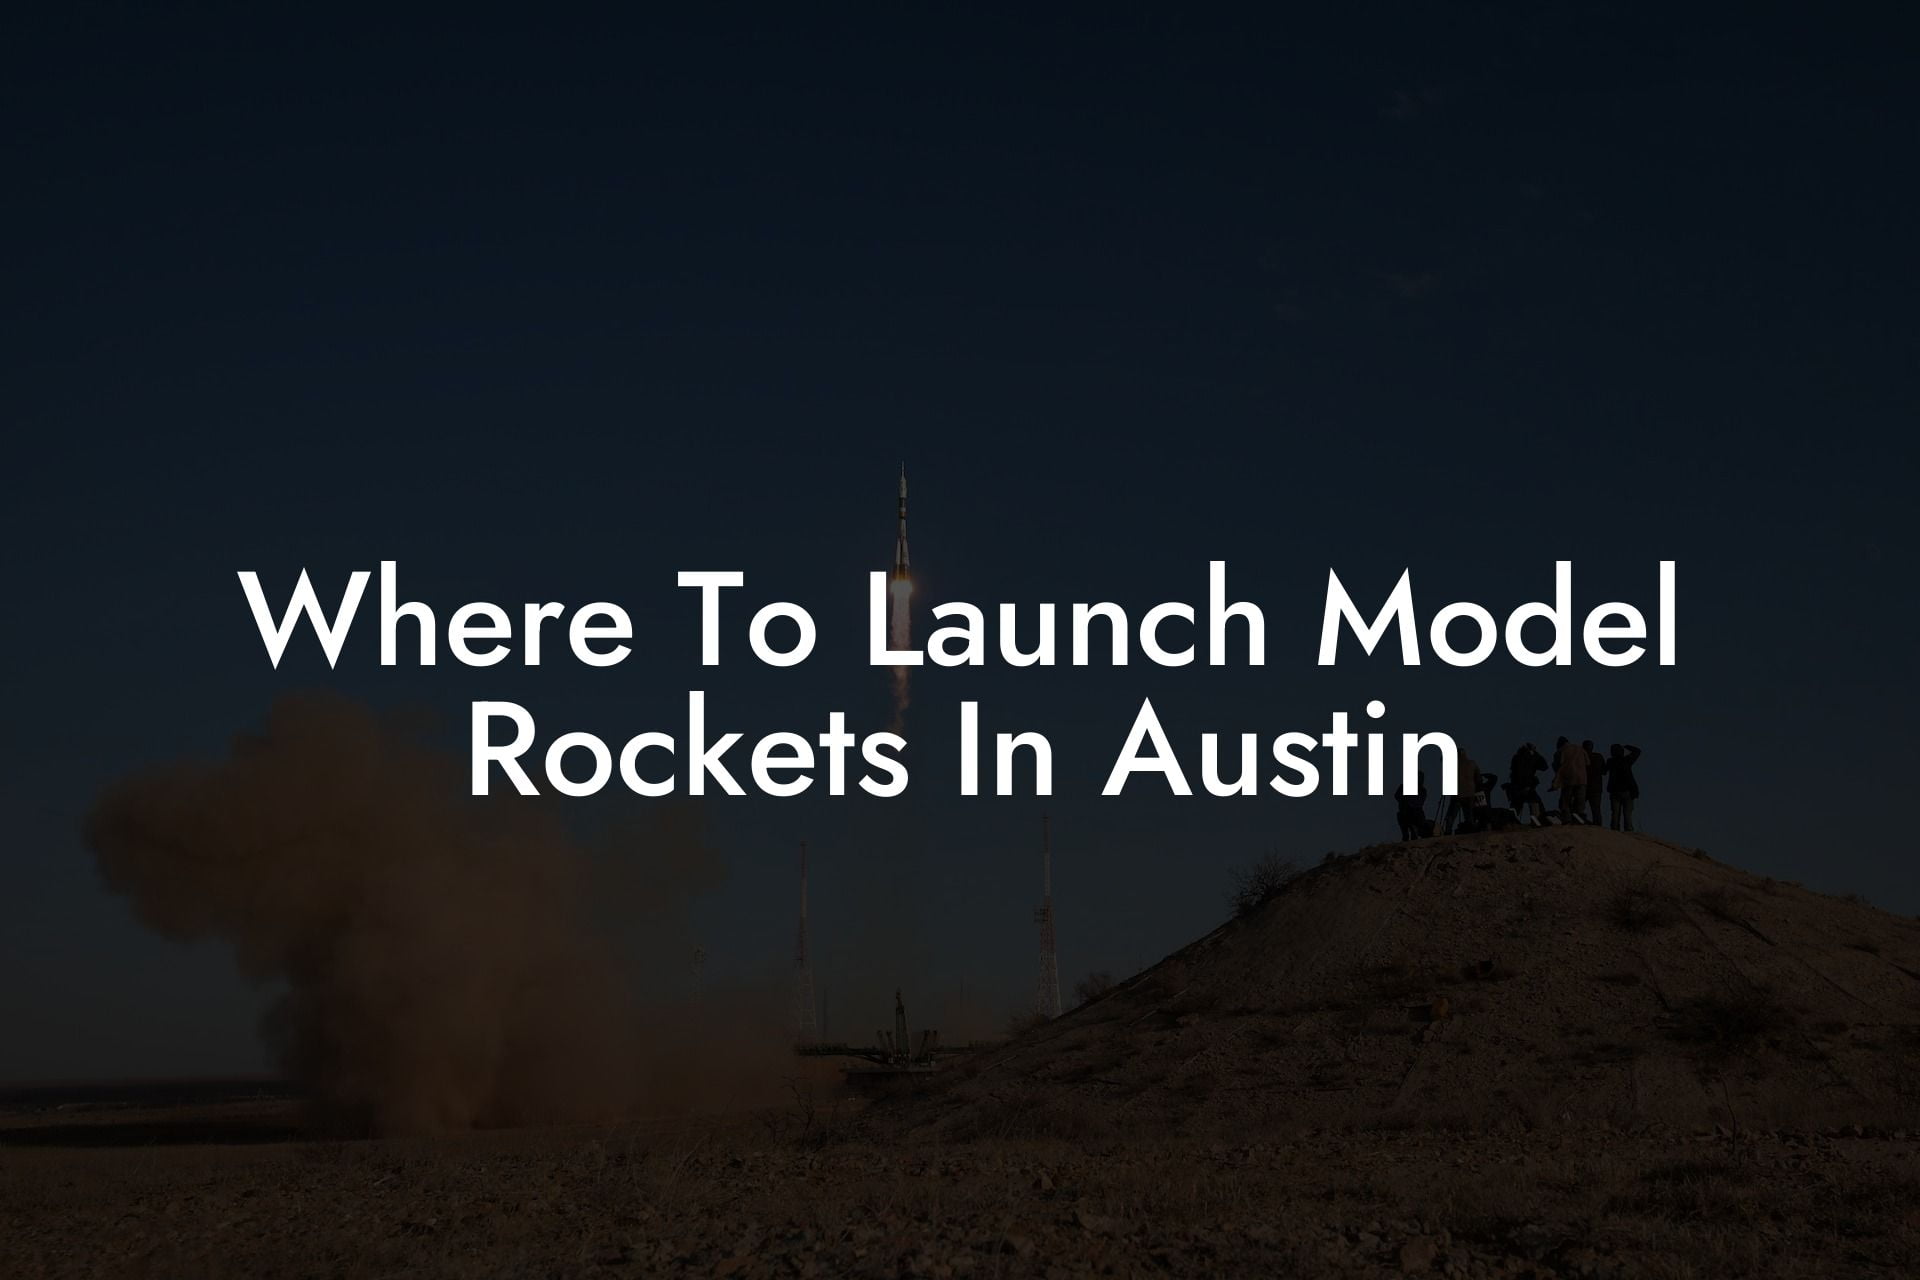 Where To Launch Model Rockets In Austin